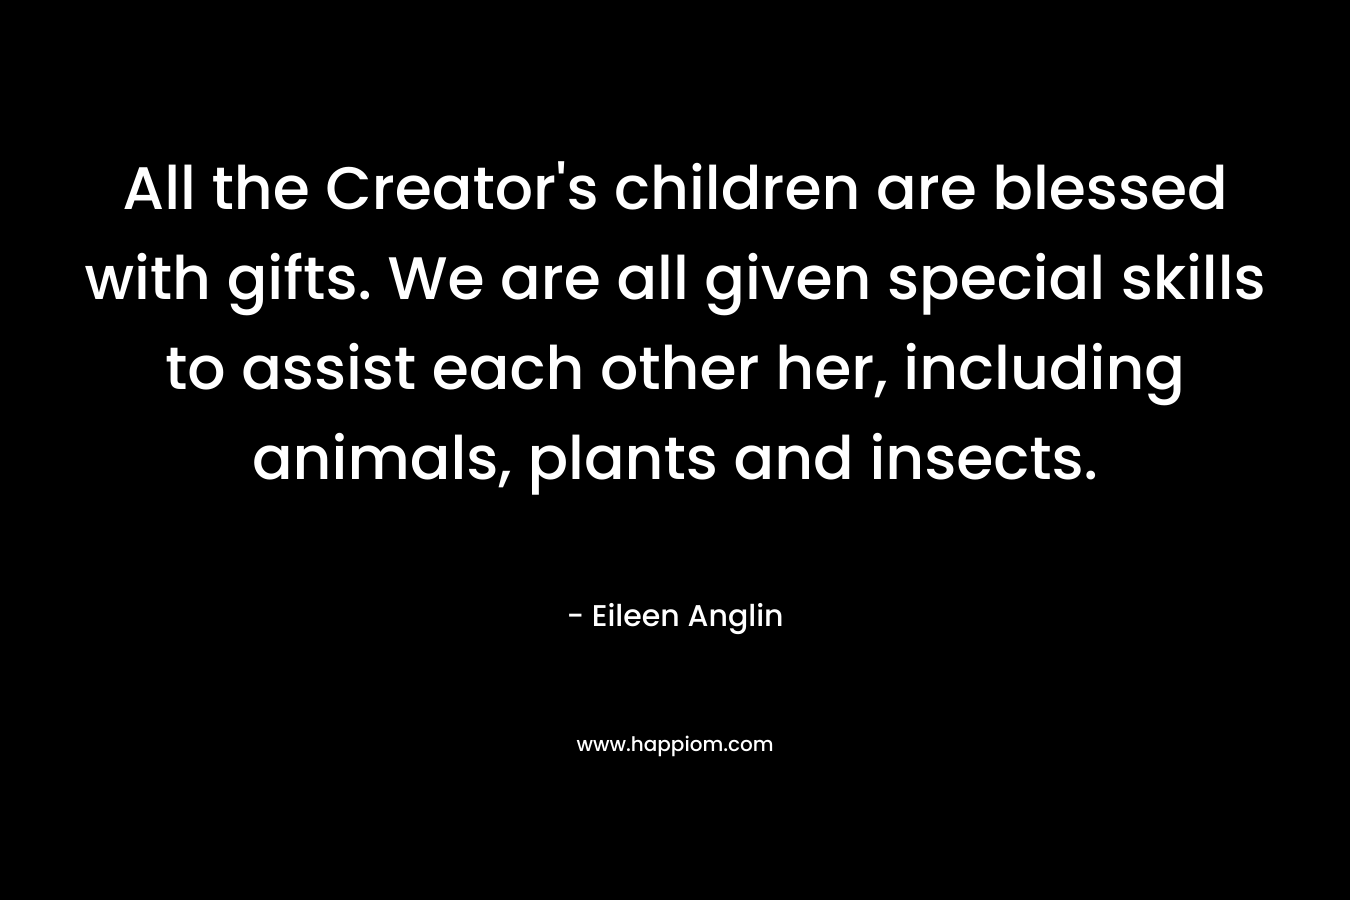 All the Creator's children are blessed with gifts. We are all given special skills to assist each other her, including animals, plants and insects.